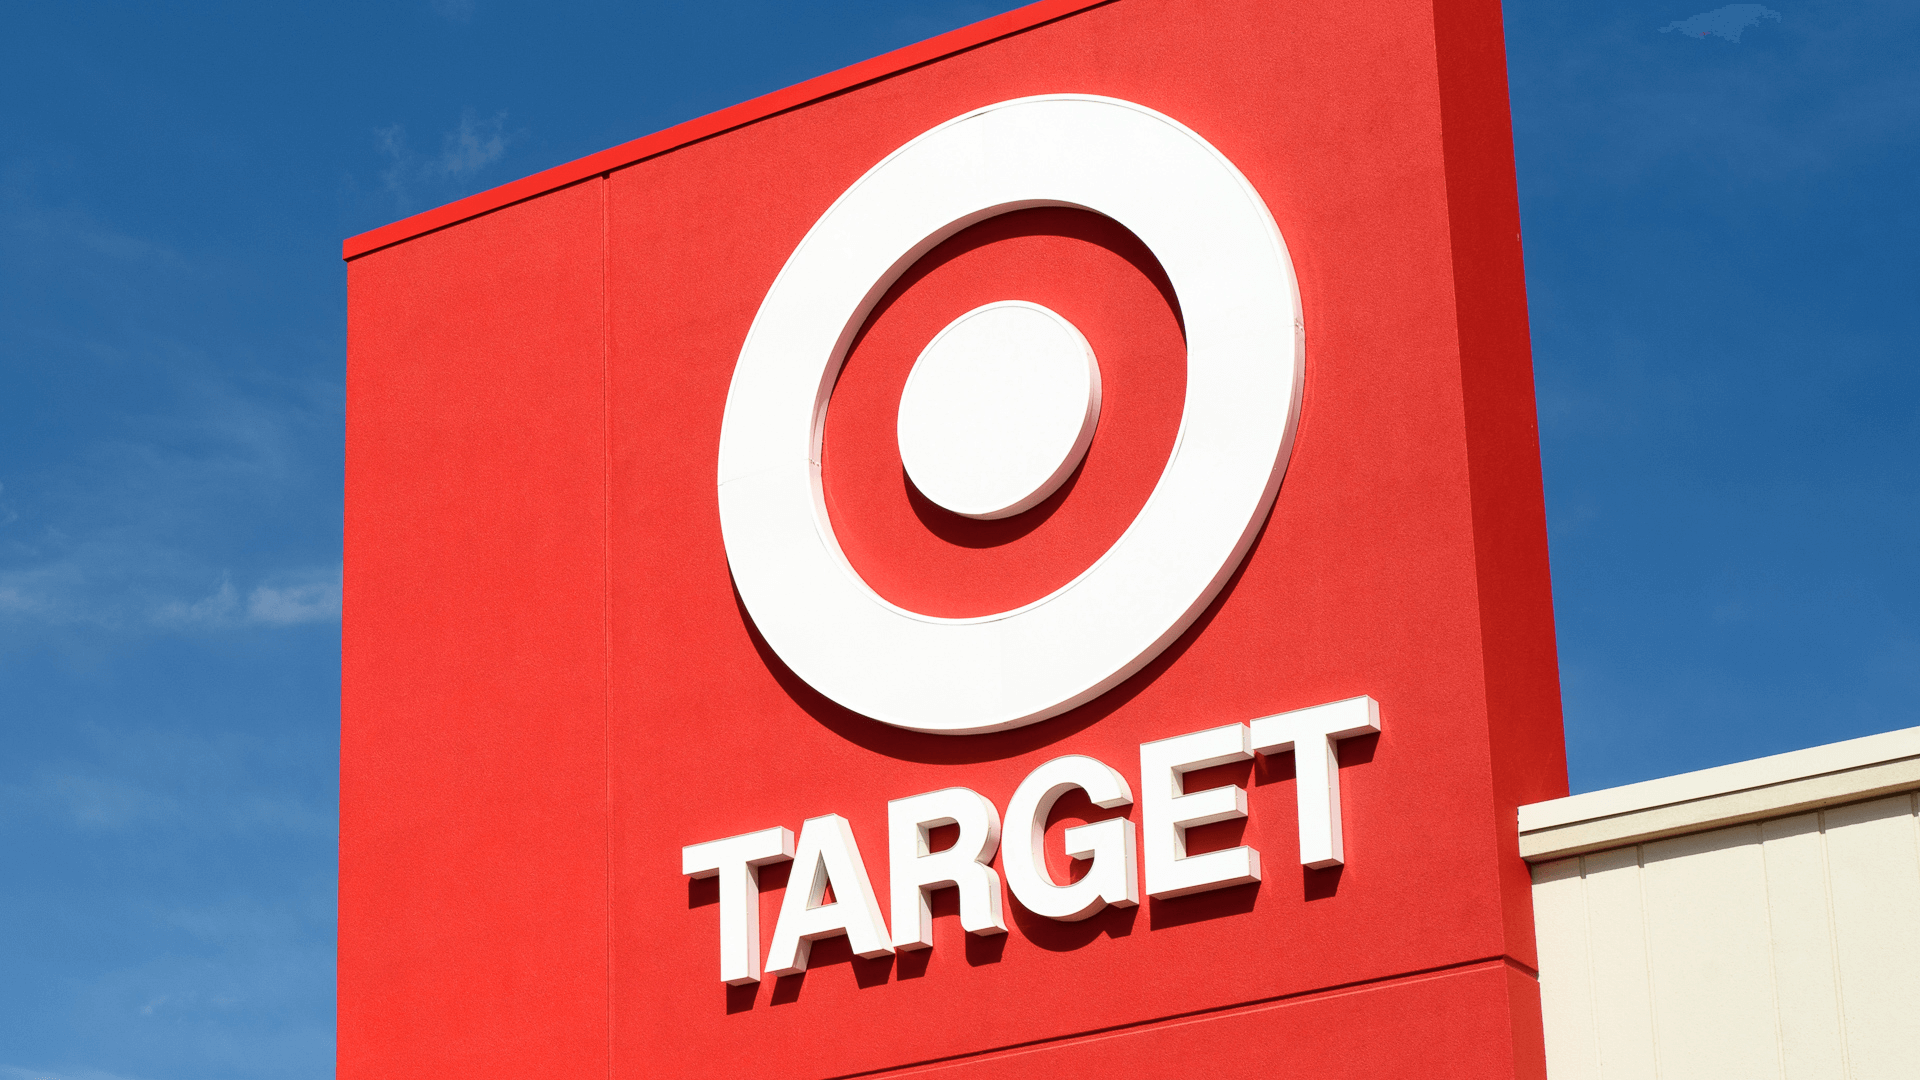 Target Plans To Build On Its Private Label Success With New Food Brand,  Favorite Day